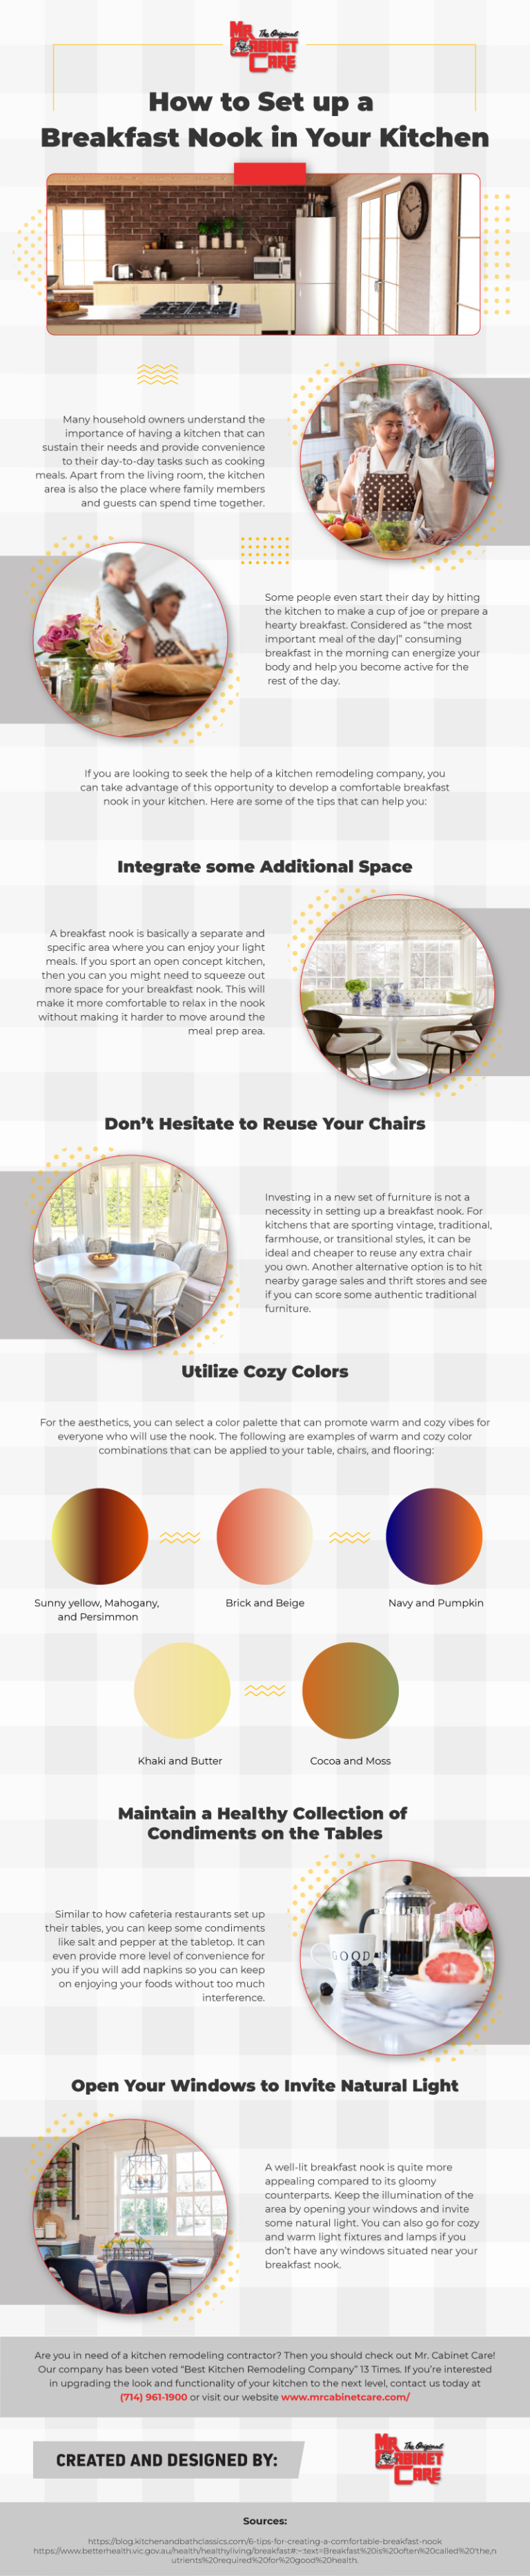 How to Set up a Breakfast Nook in Your Kitchen – Infographic